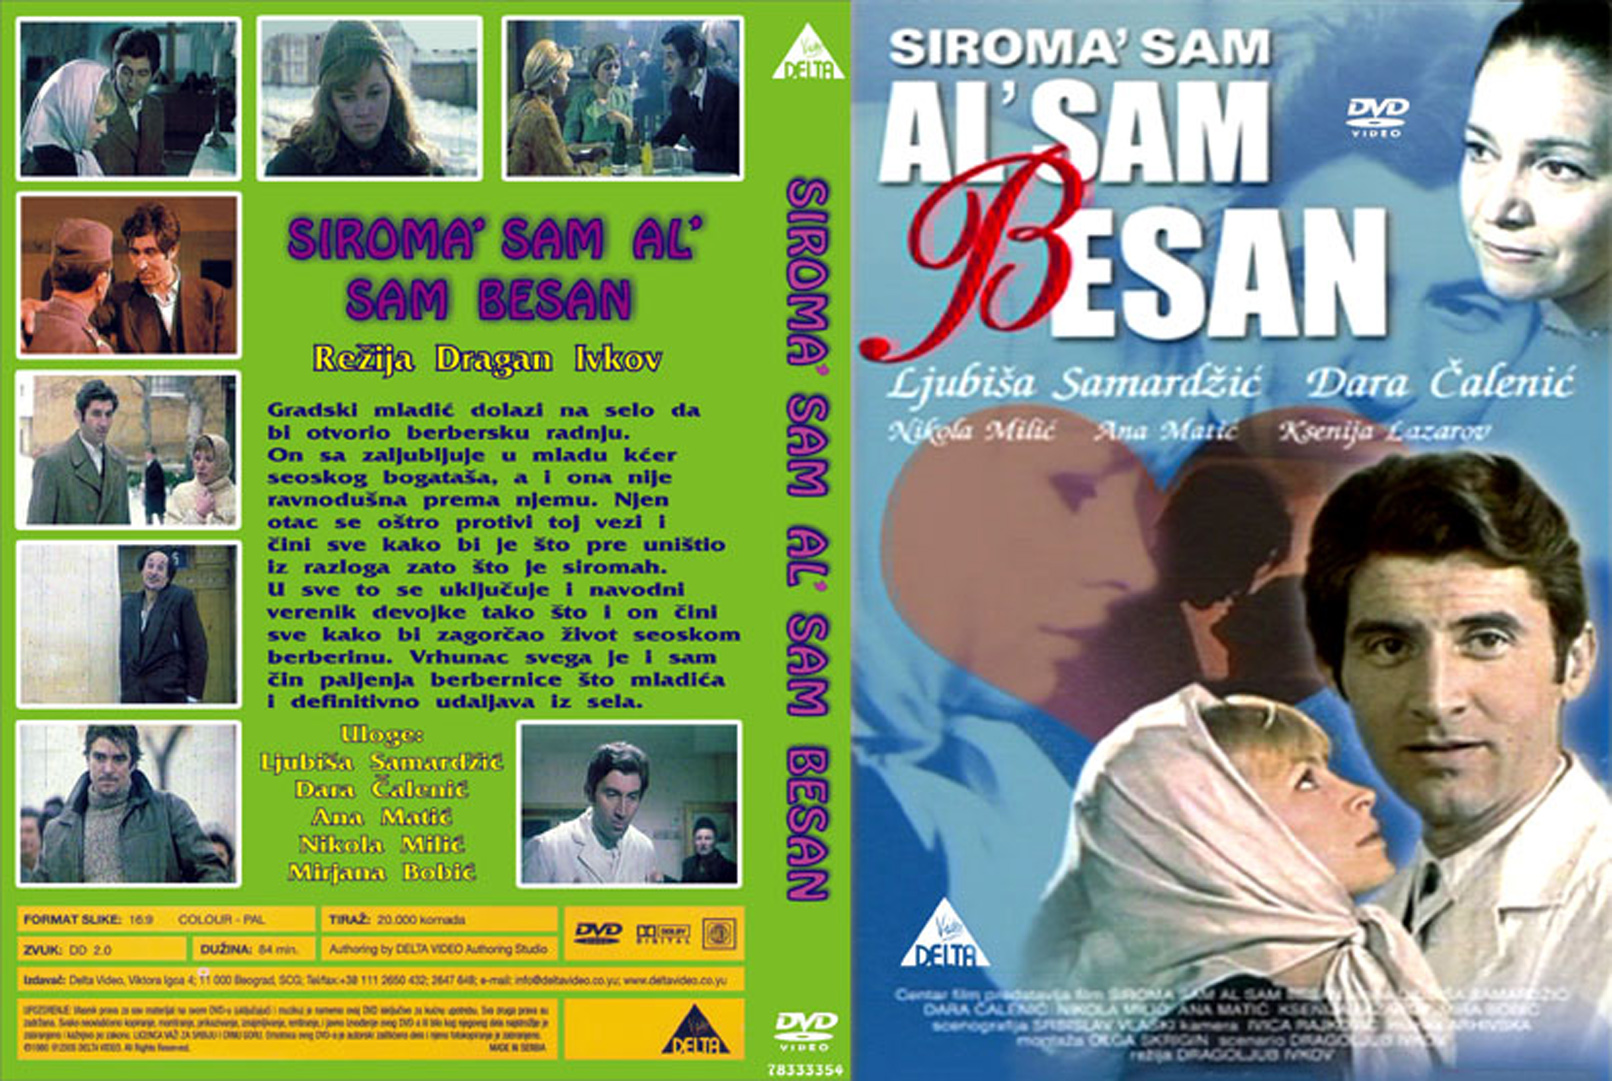 Click to view full size image -  DVD Cover - S - siroma_sam_al_sam_besan_dvd - siroma_sam_al_sam_besan_dvd.jpg